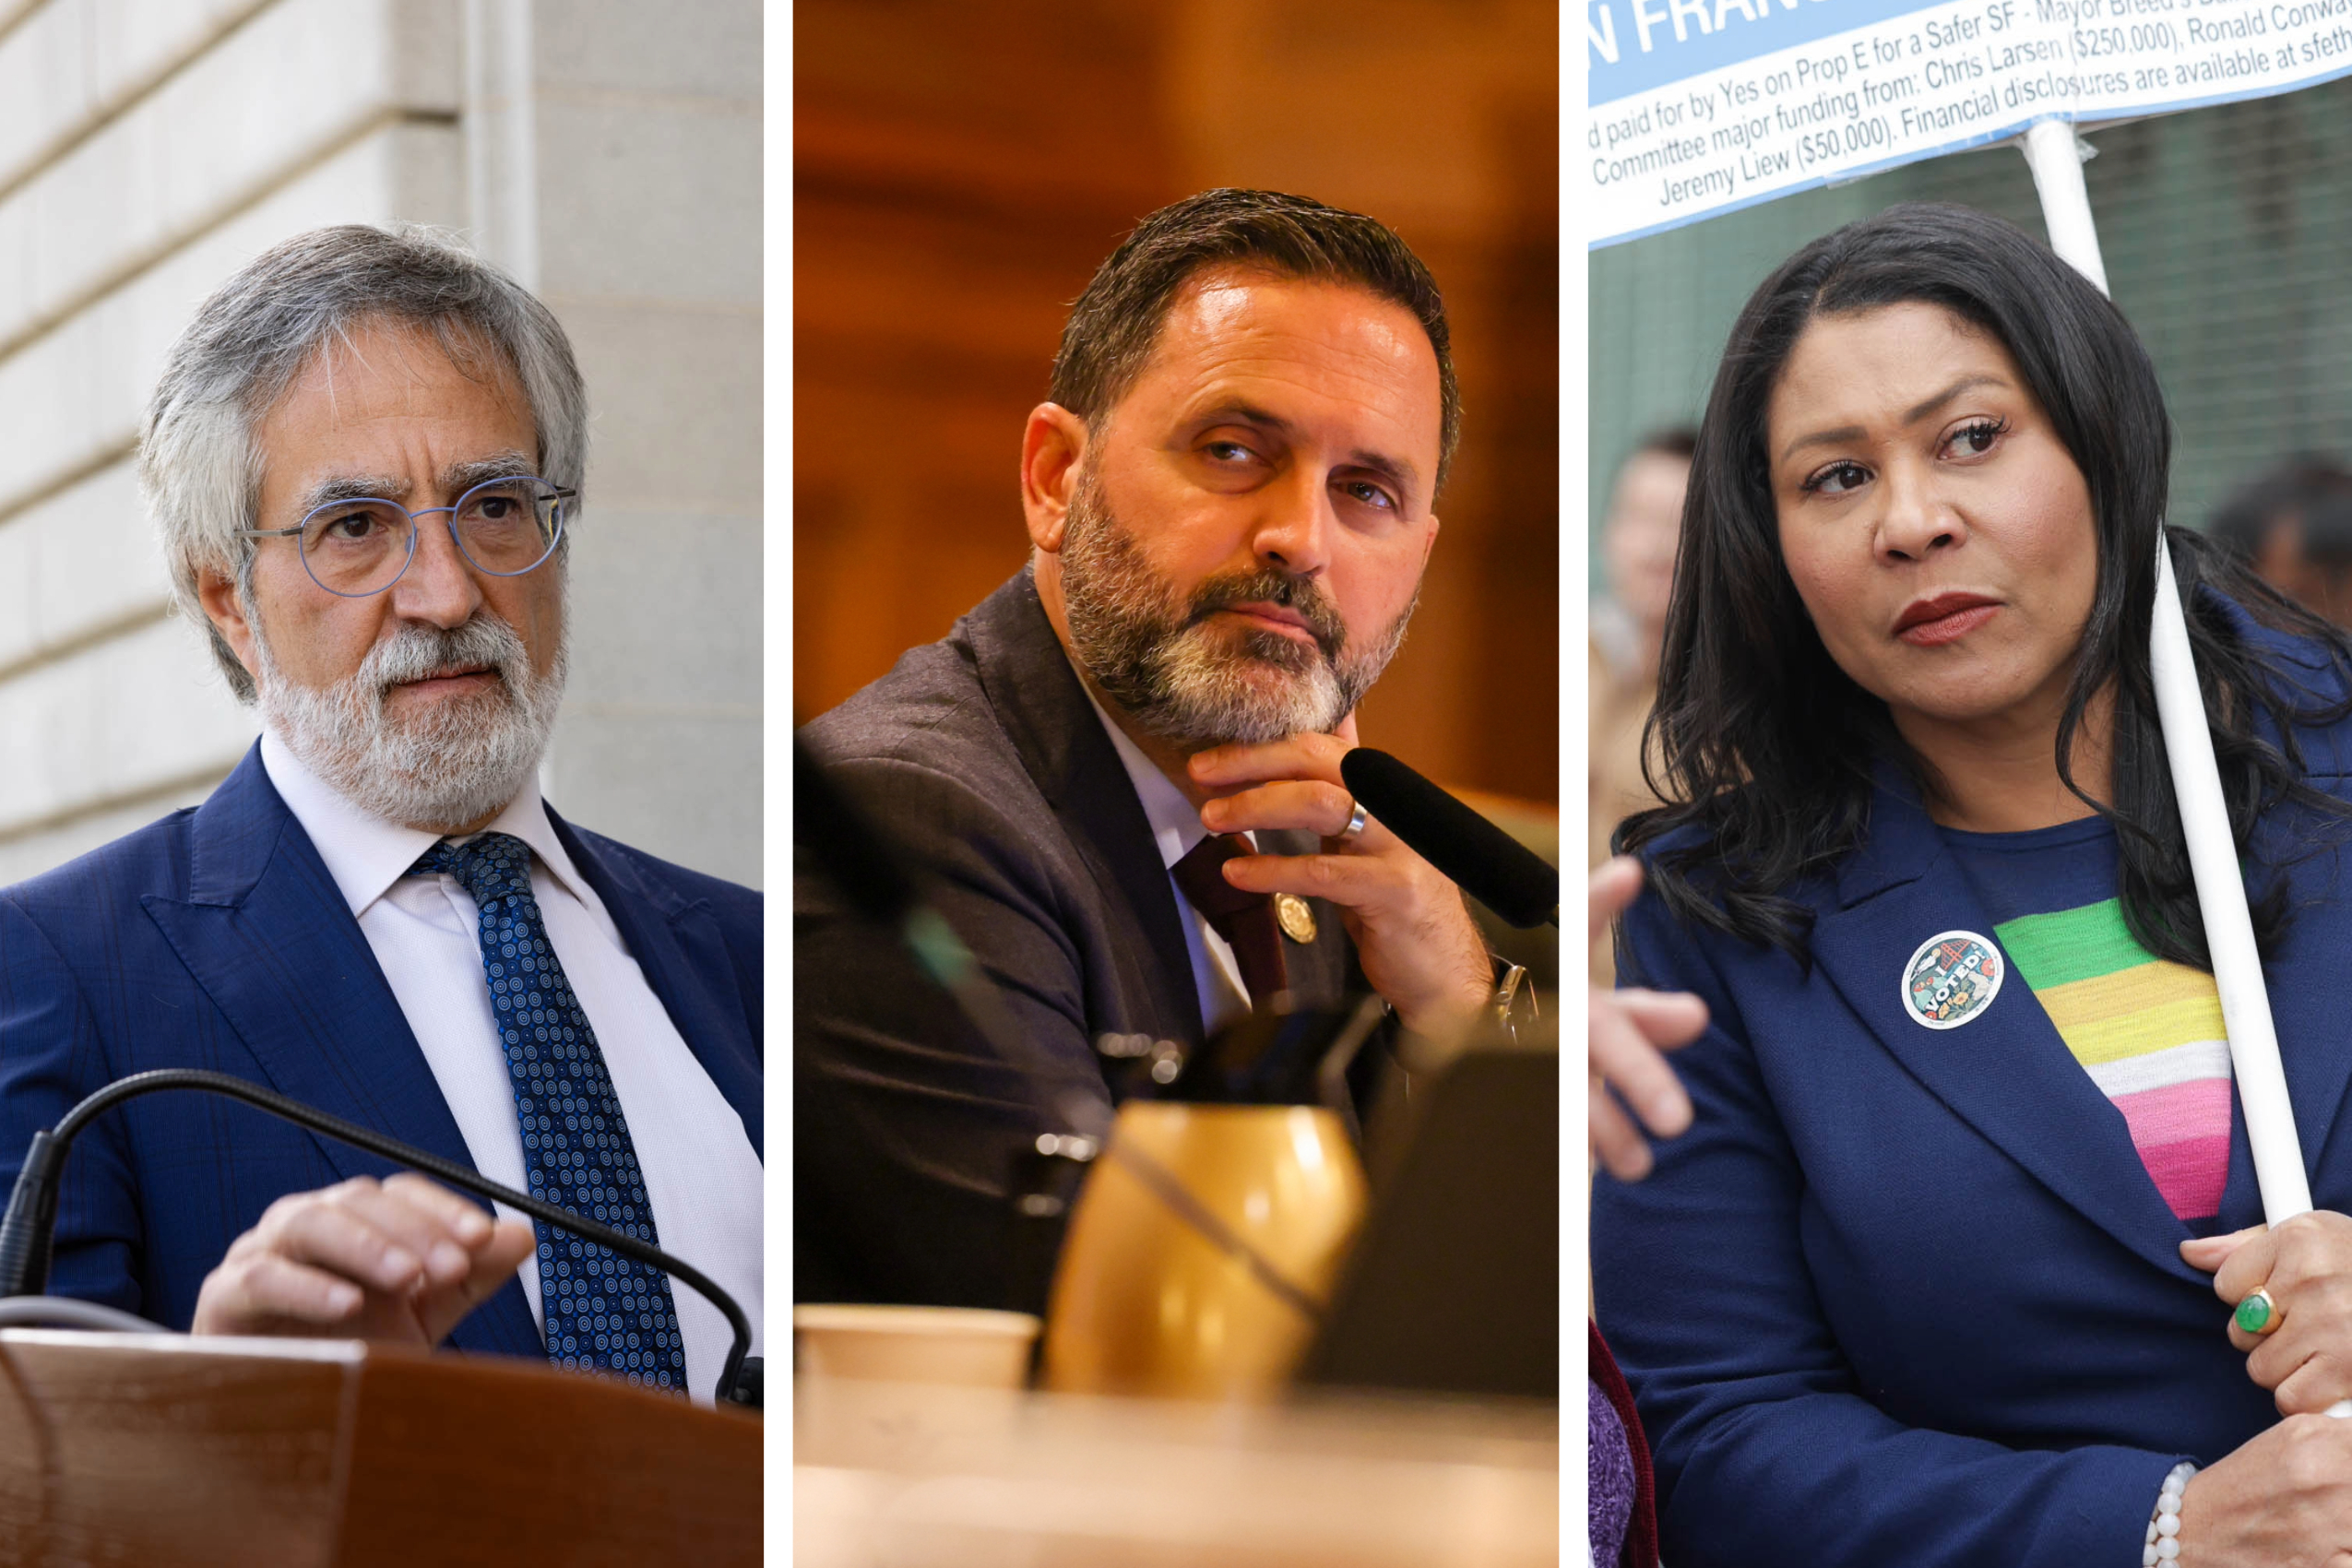 In a composite image, Supervisor Aaron Peskin stands at a podium, Supervisor Ahsha Safaí looks contemplatively during a meeting and Mayor London Breed looks inquisitively while holding a sign.